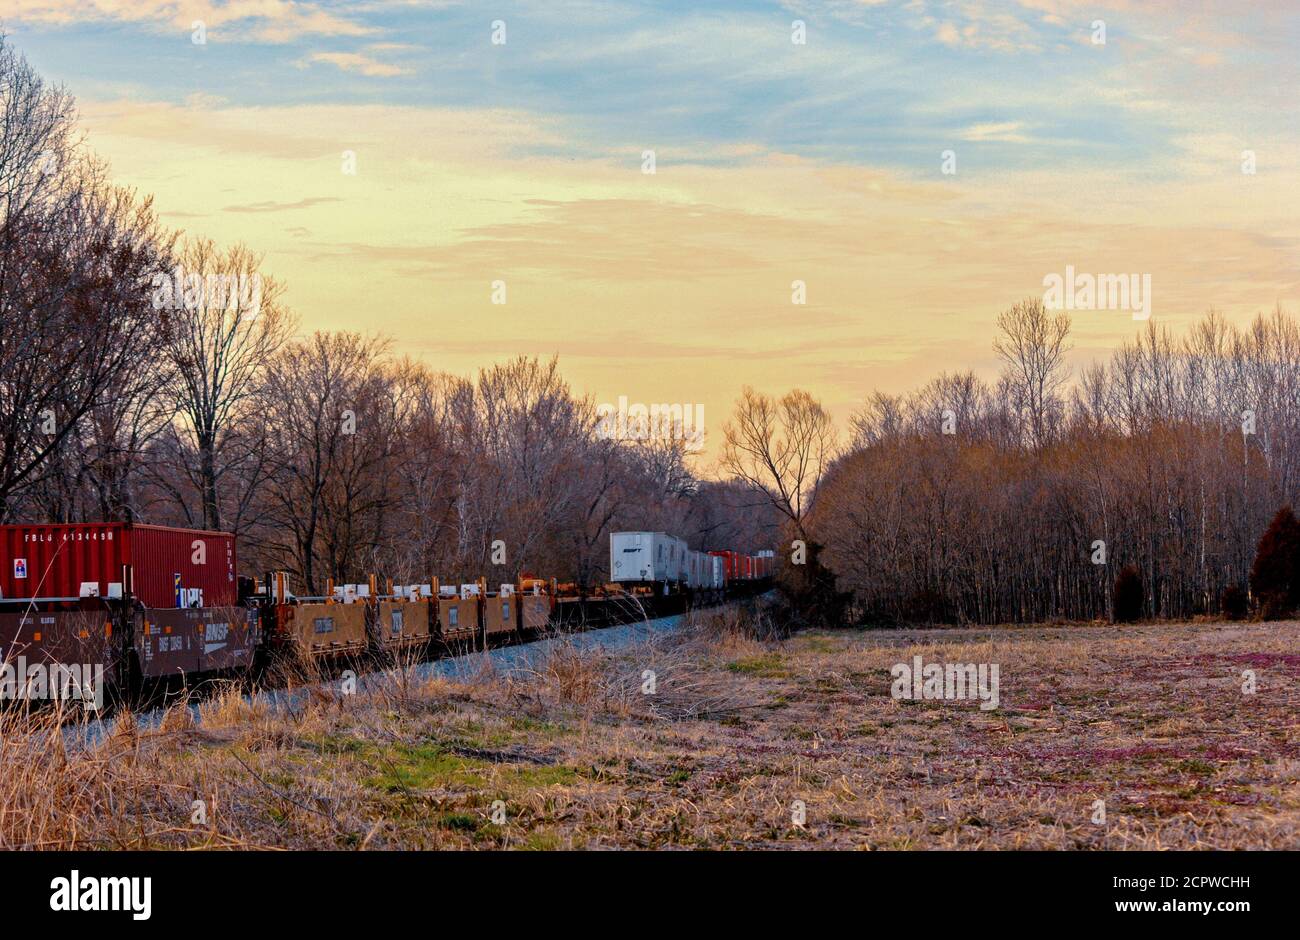 Freight train transportation is still very active as seen by this train hauling goods on a track near McKenzie, Tennessee. Stock Photo